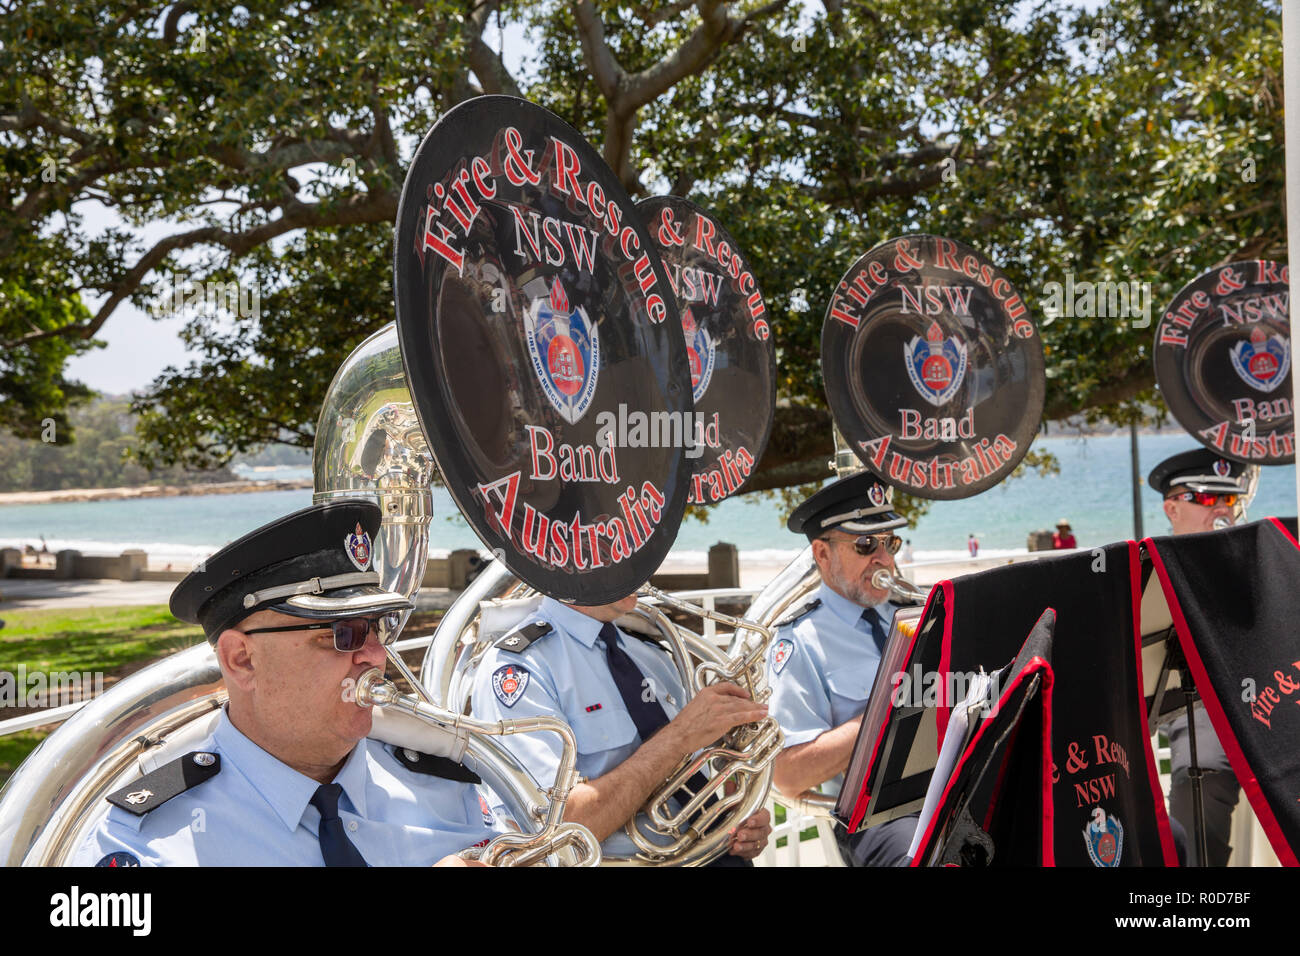 Sydney, Australia. 4th November, 2018. Balmoral Beach, NSW Fire and Rescue Band and Marching team perform at the rotunda in Balmoral Reserve, on Sunday 4th November 2018, Balmoral beach Sydney,Australia Credit: martin berry/Alamy Live News Stock Photo